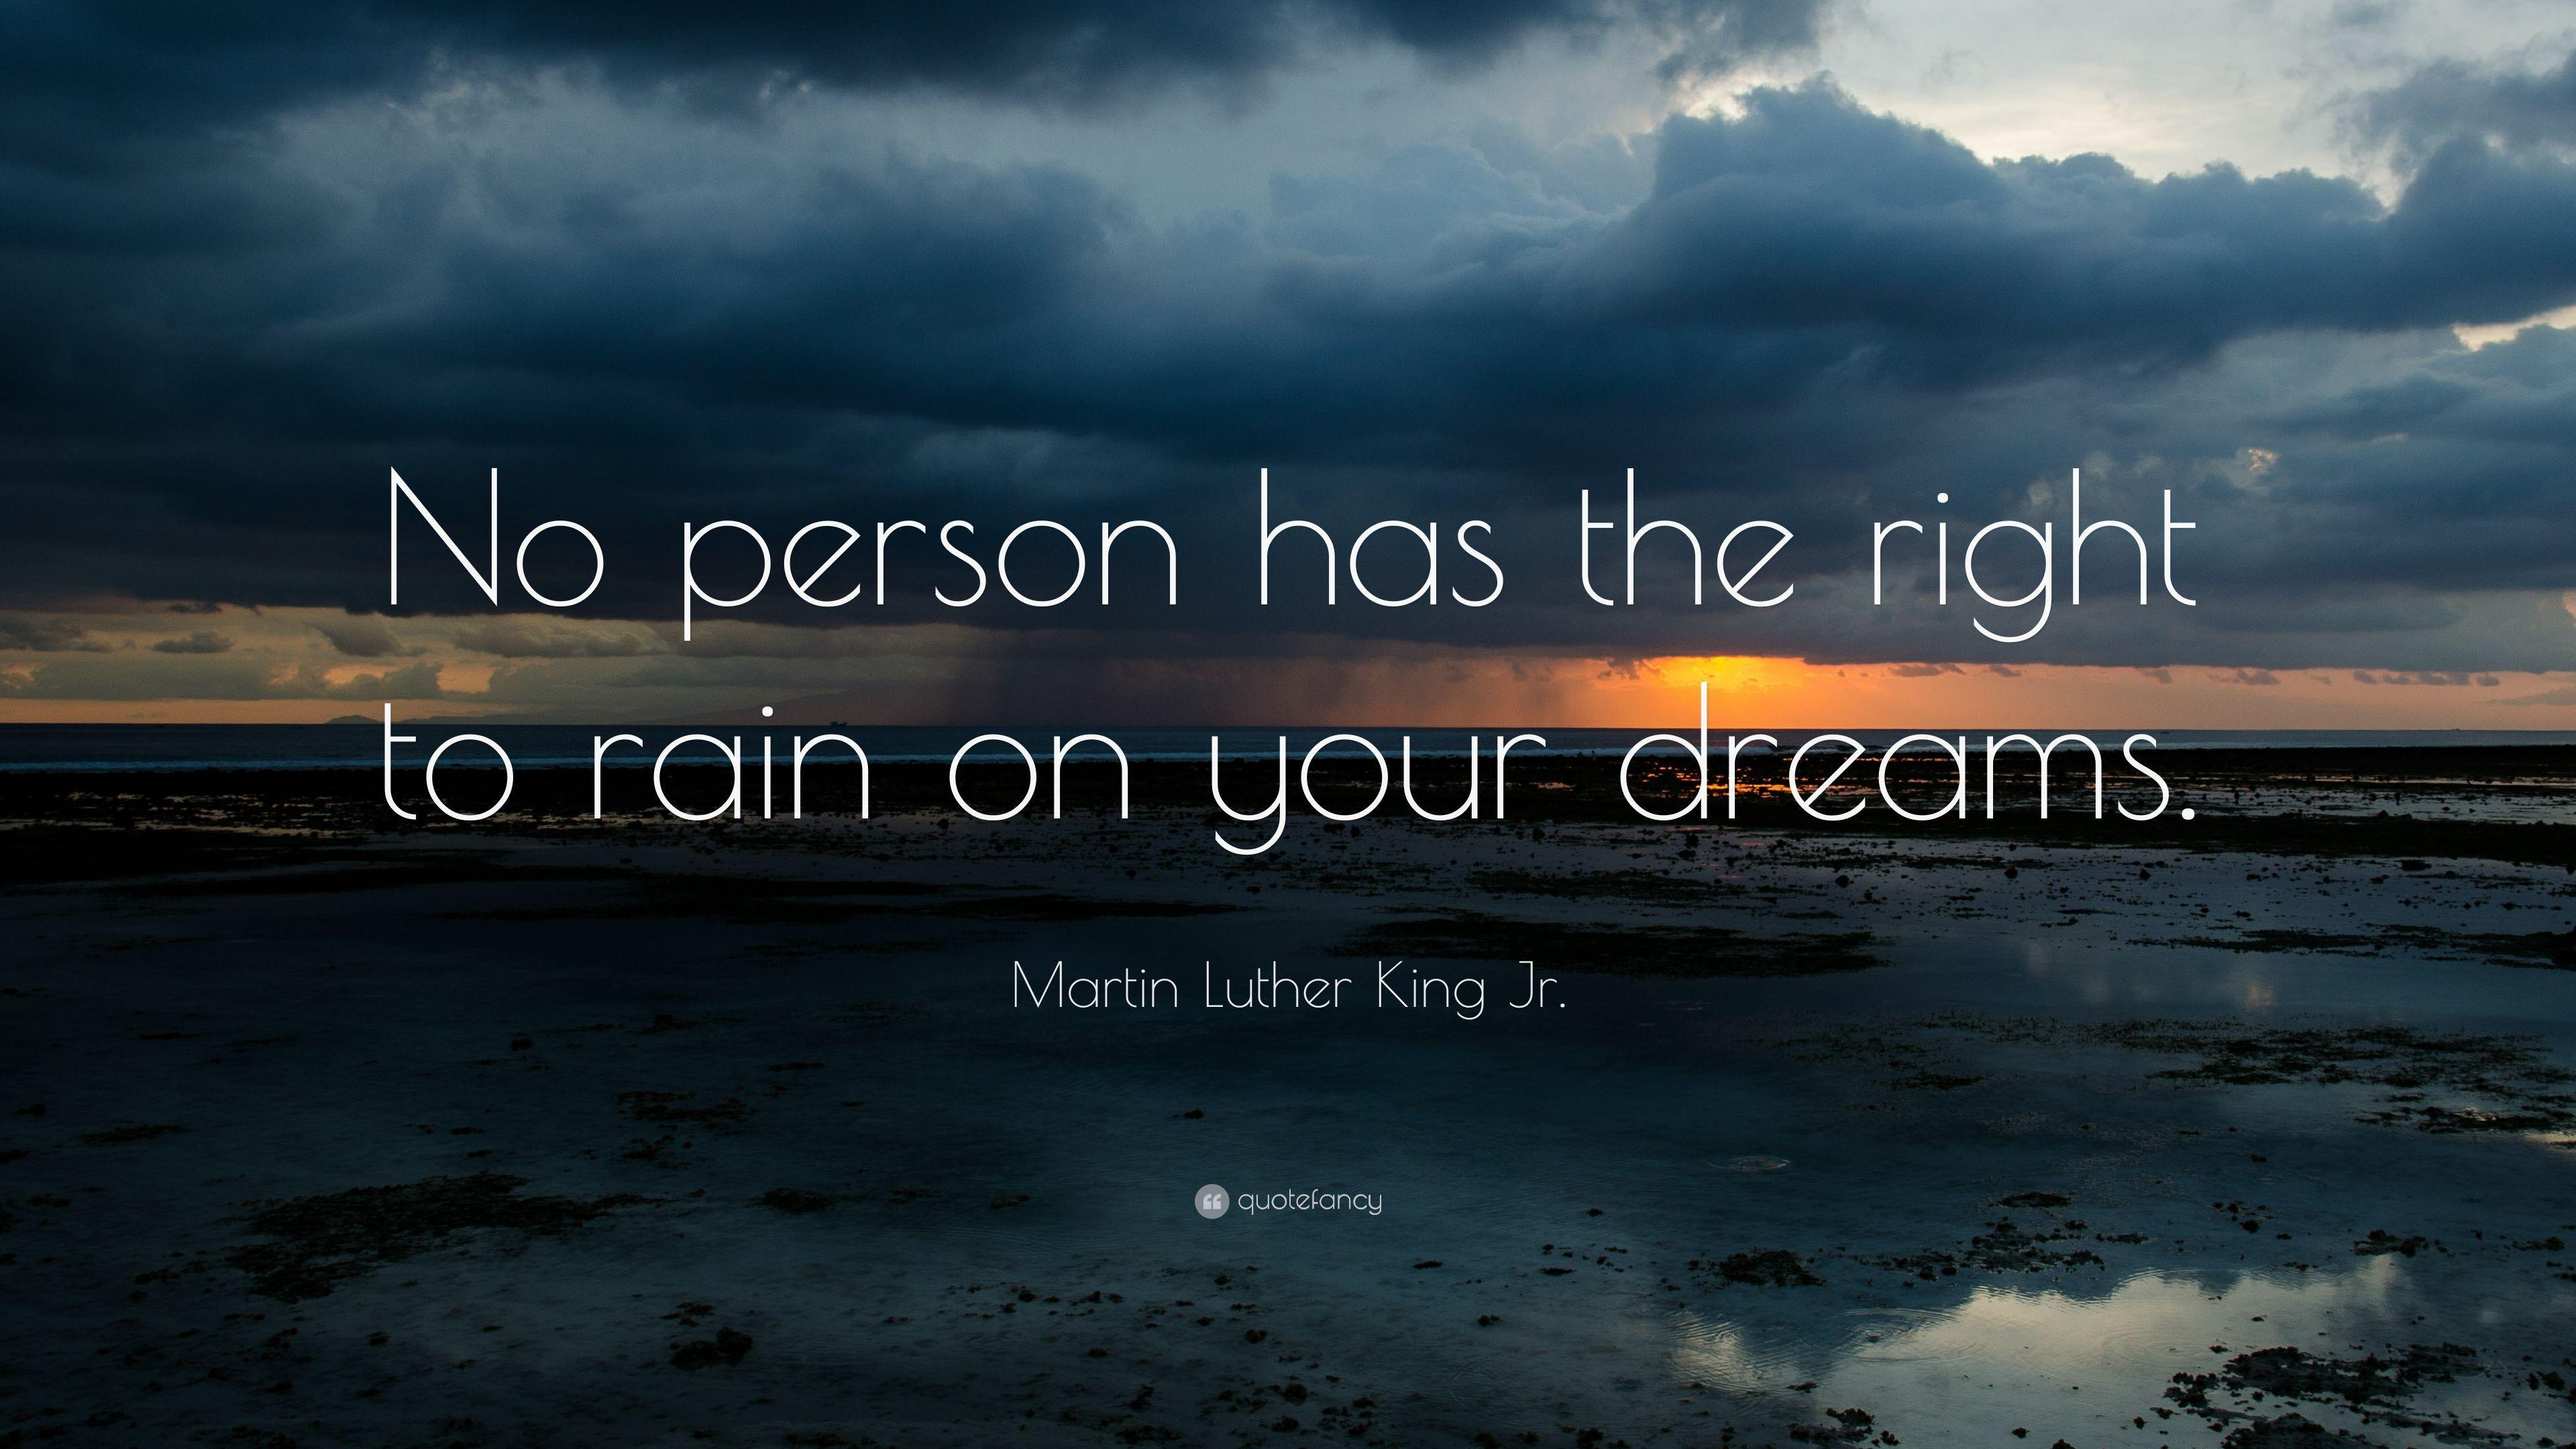 Martin Luther King Jr. Quote: “No person has the right to rain